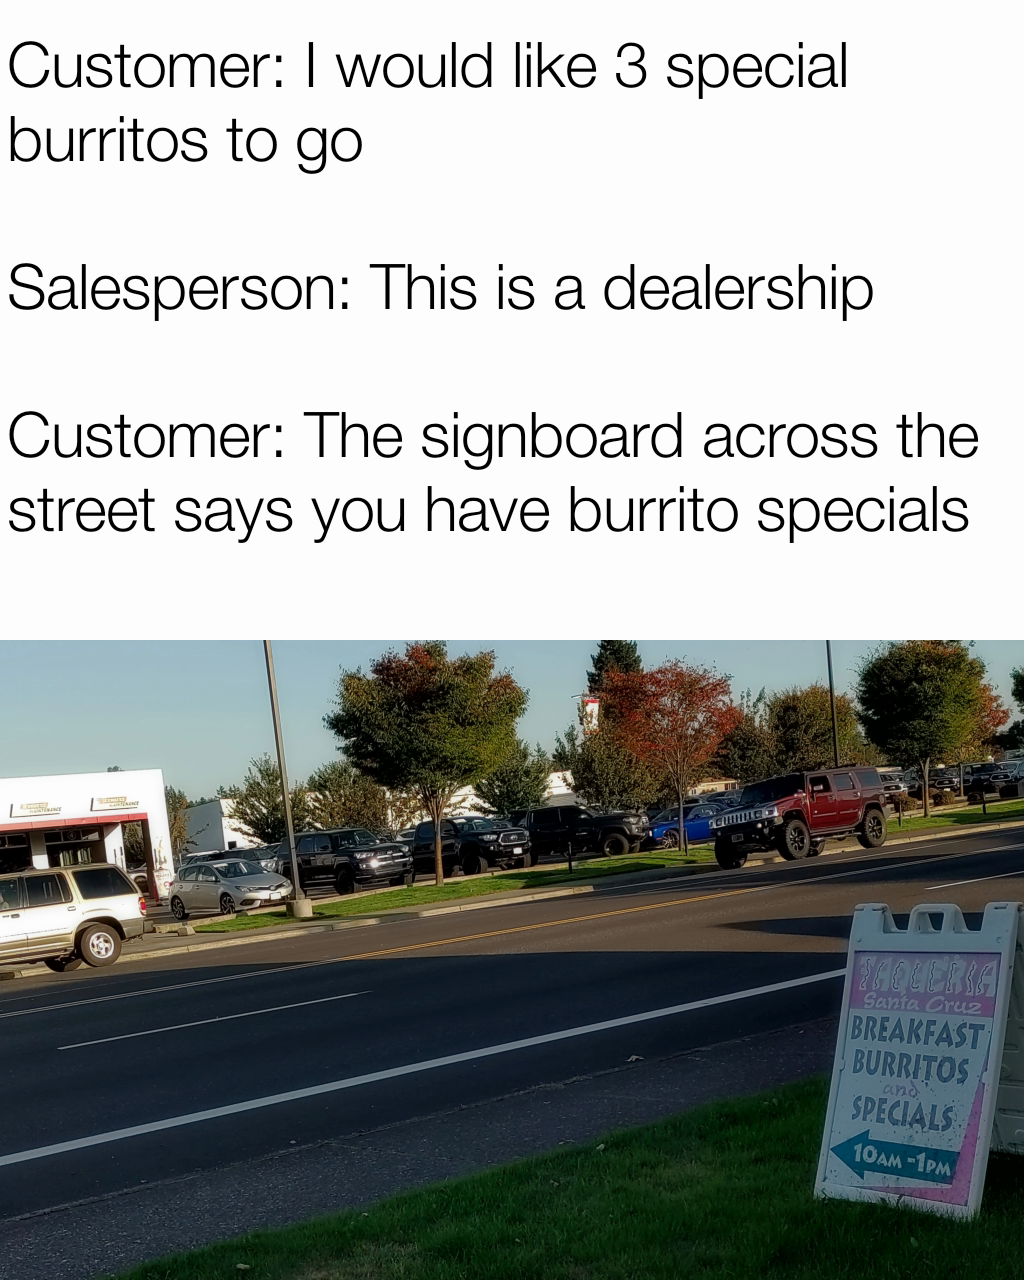 Customer: I would like 3 special burritos to go

Salesperson: This is a dealership

Customer: The signboard across the street says you have burrito specials
 Common Sense: In great demand but short supply